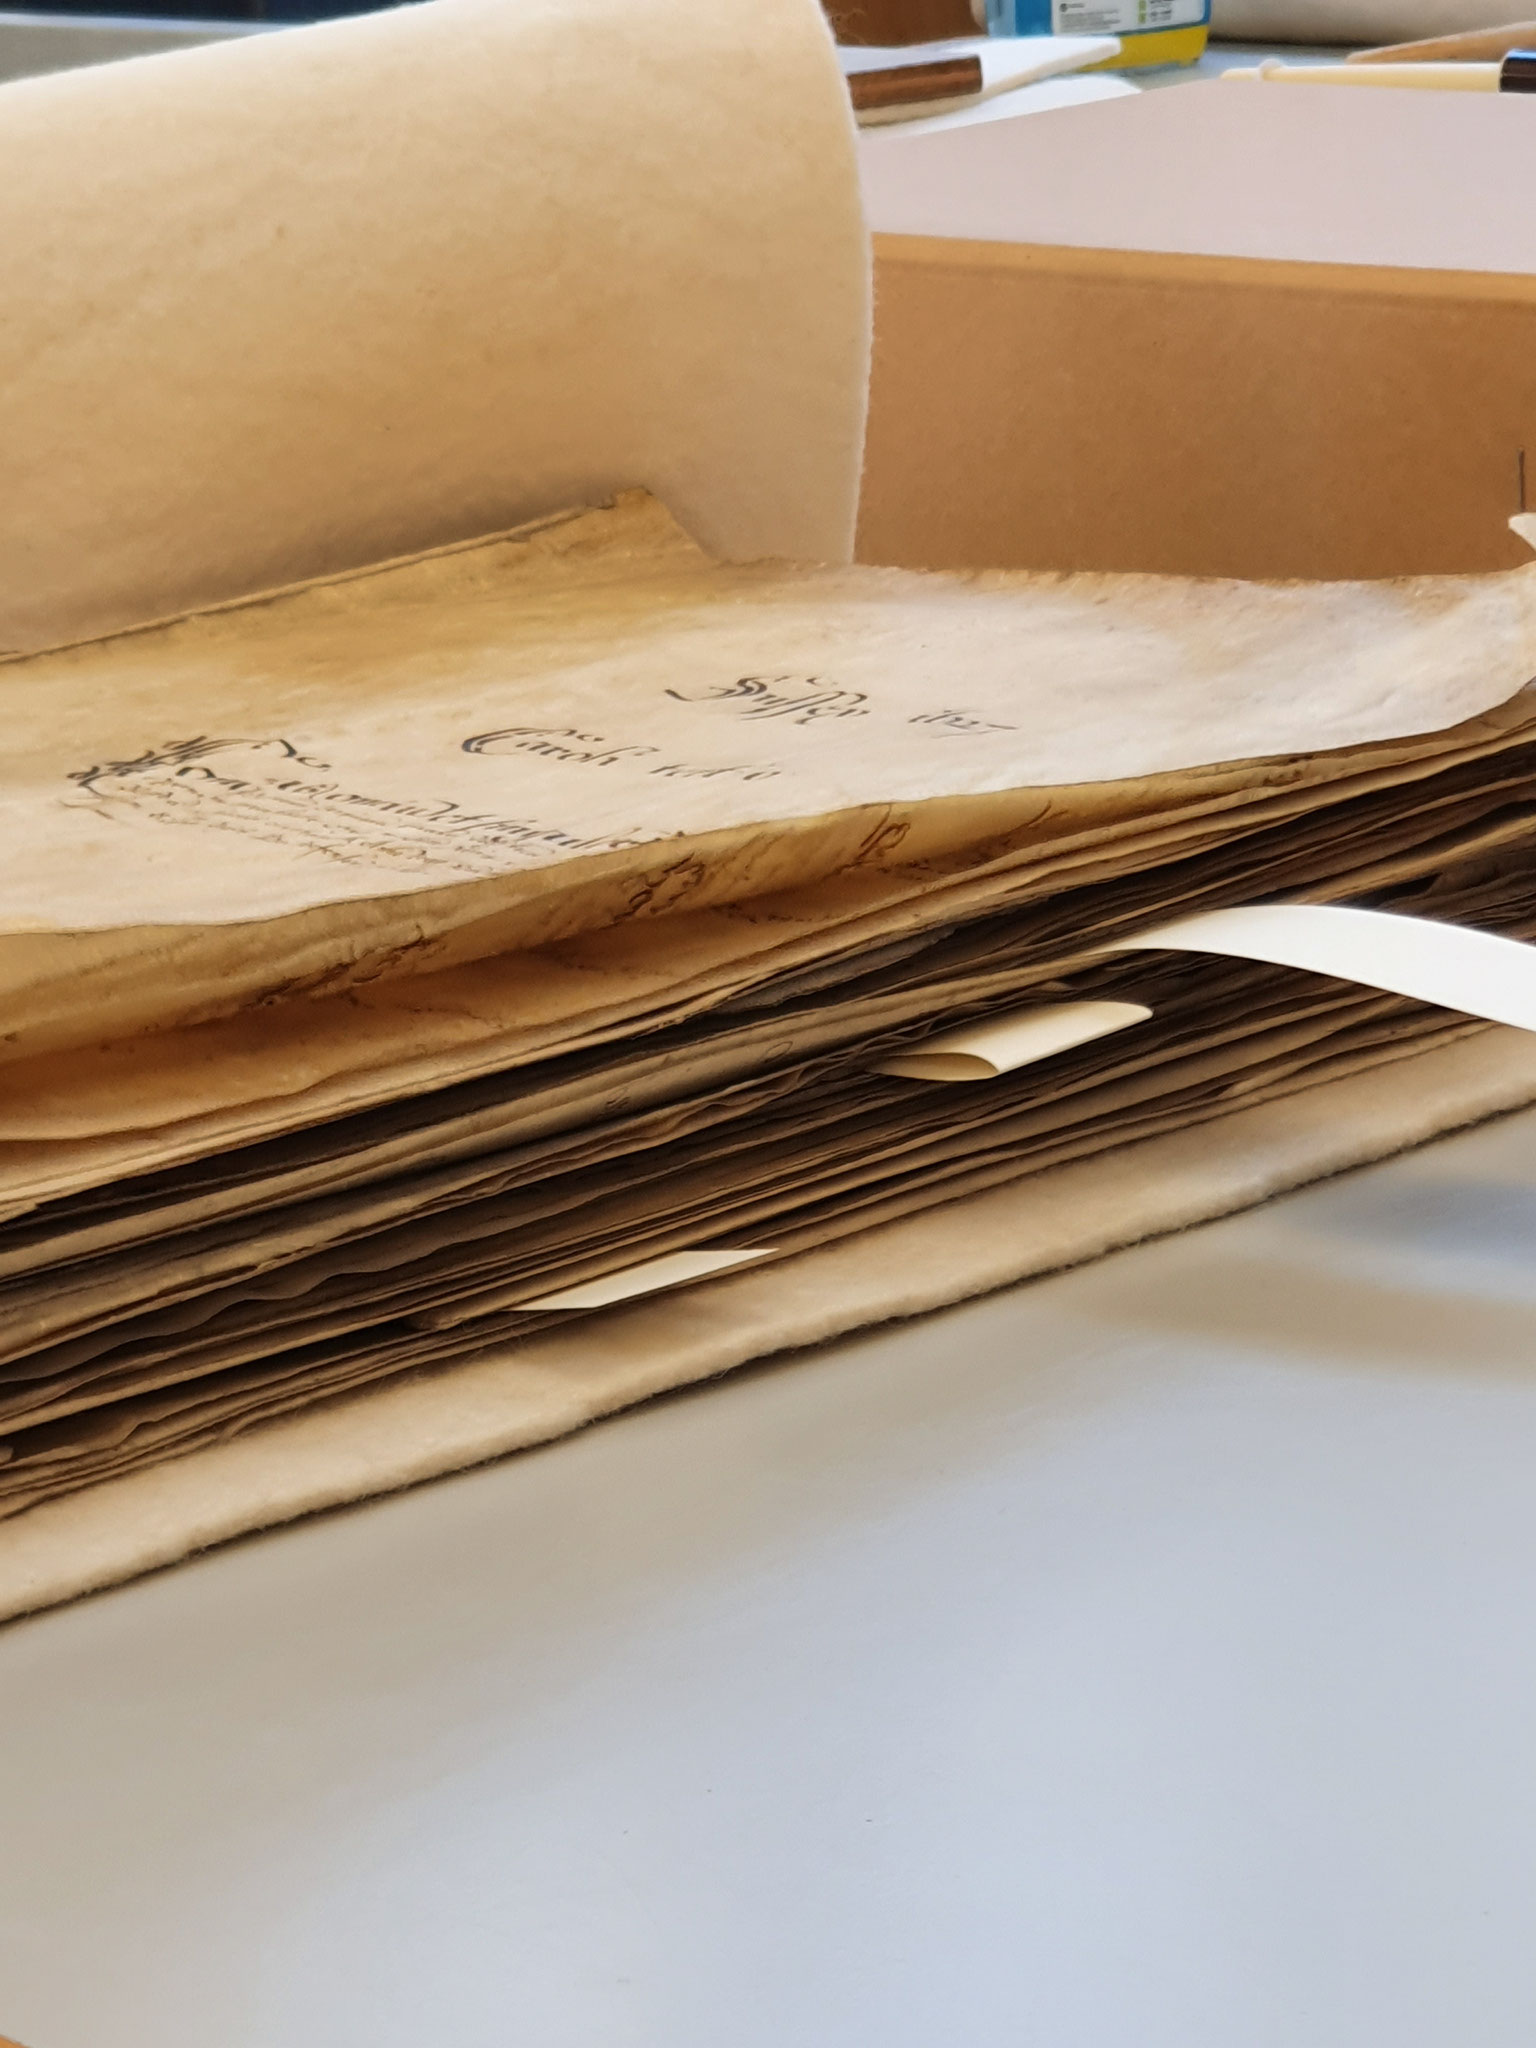 Files being restored at the OCC (Oxford Conservation Consortium) 